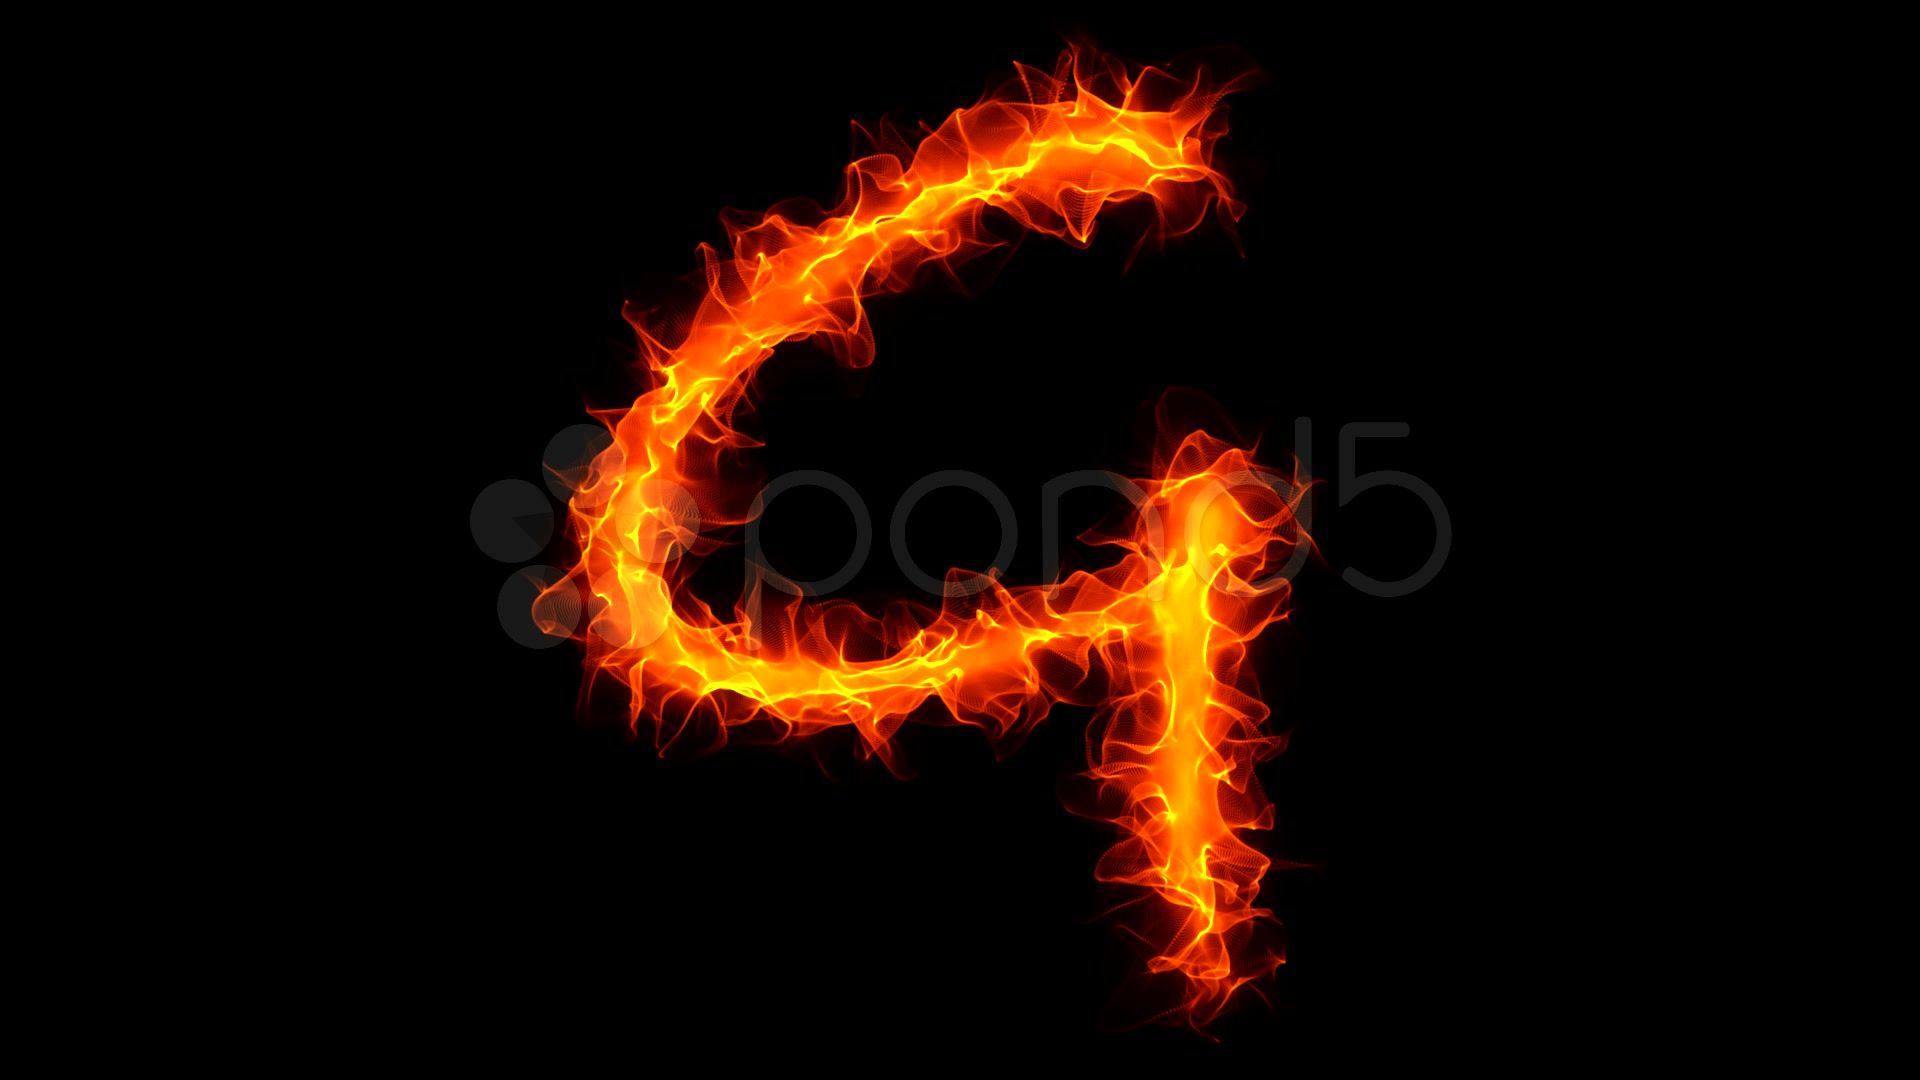 G Letter 3D HD Wallpaper image picture. Free Download